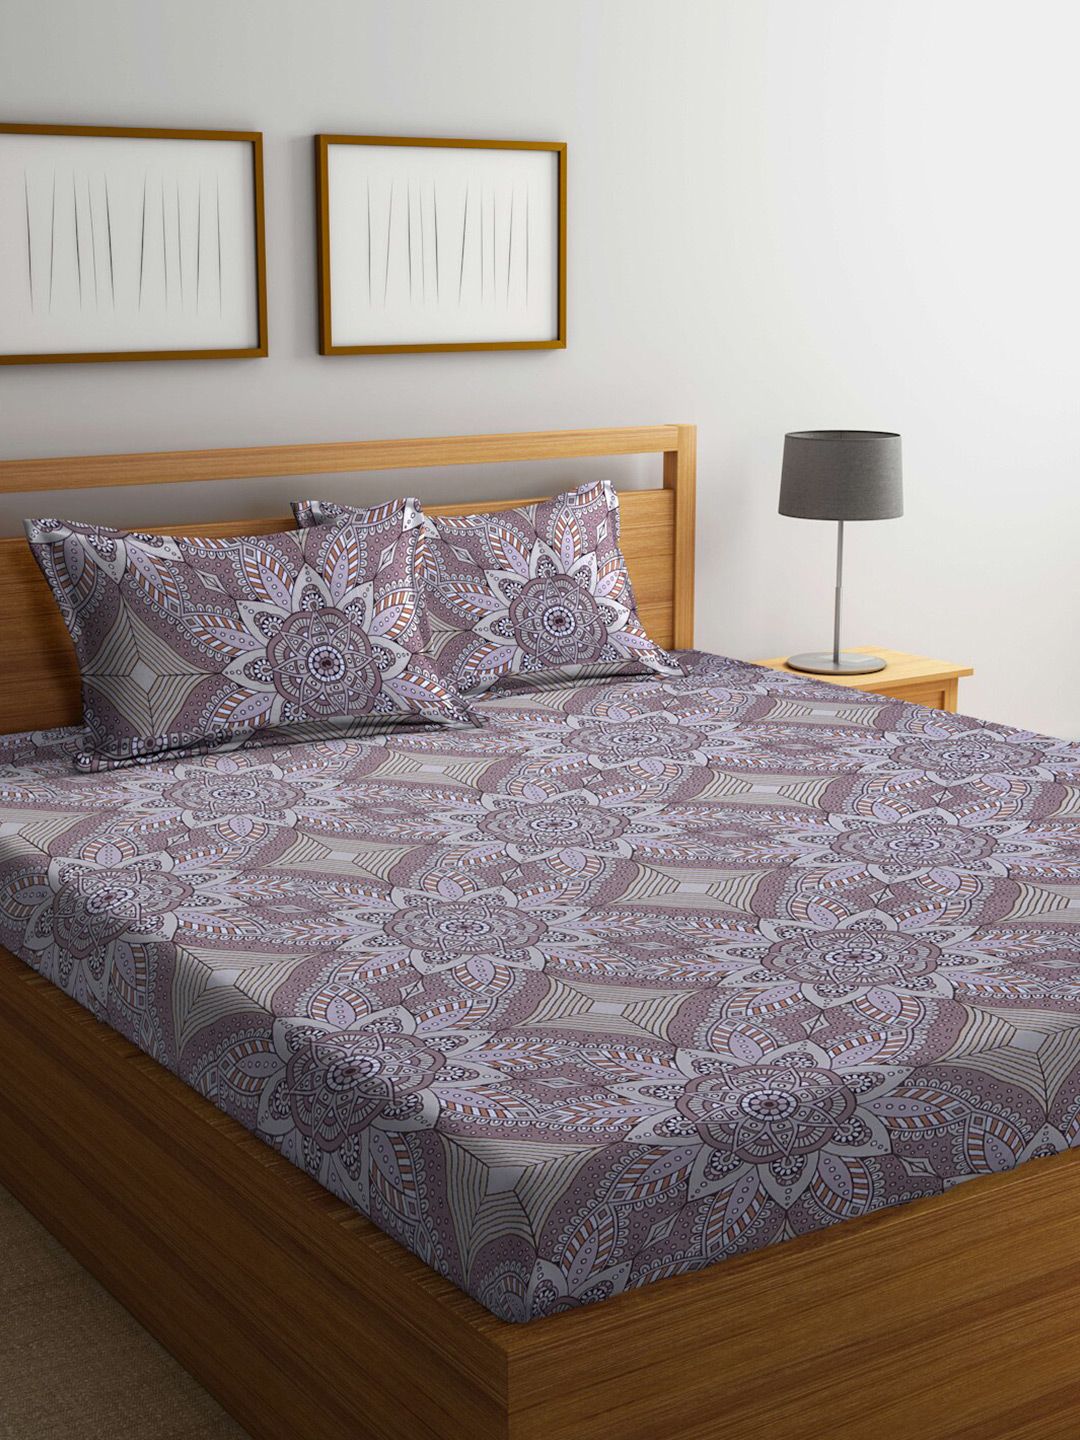 BOMBAY DYEING Brown & White 100 TC Cotton Queen Bedsheet with 2 Pillow Covers Price in India